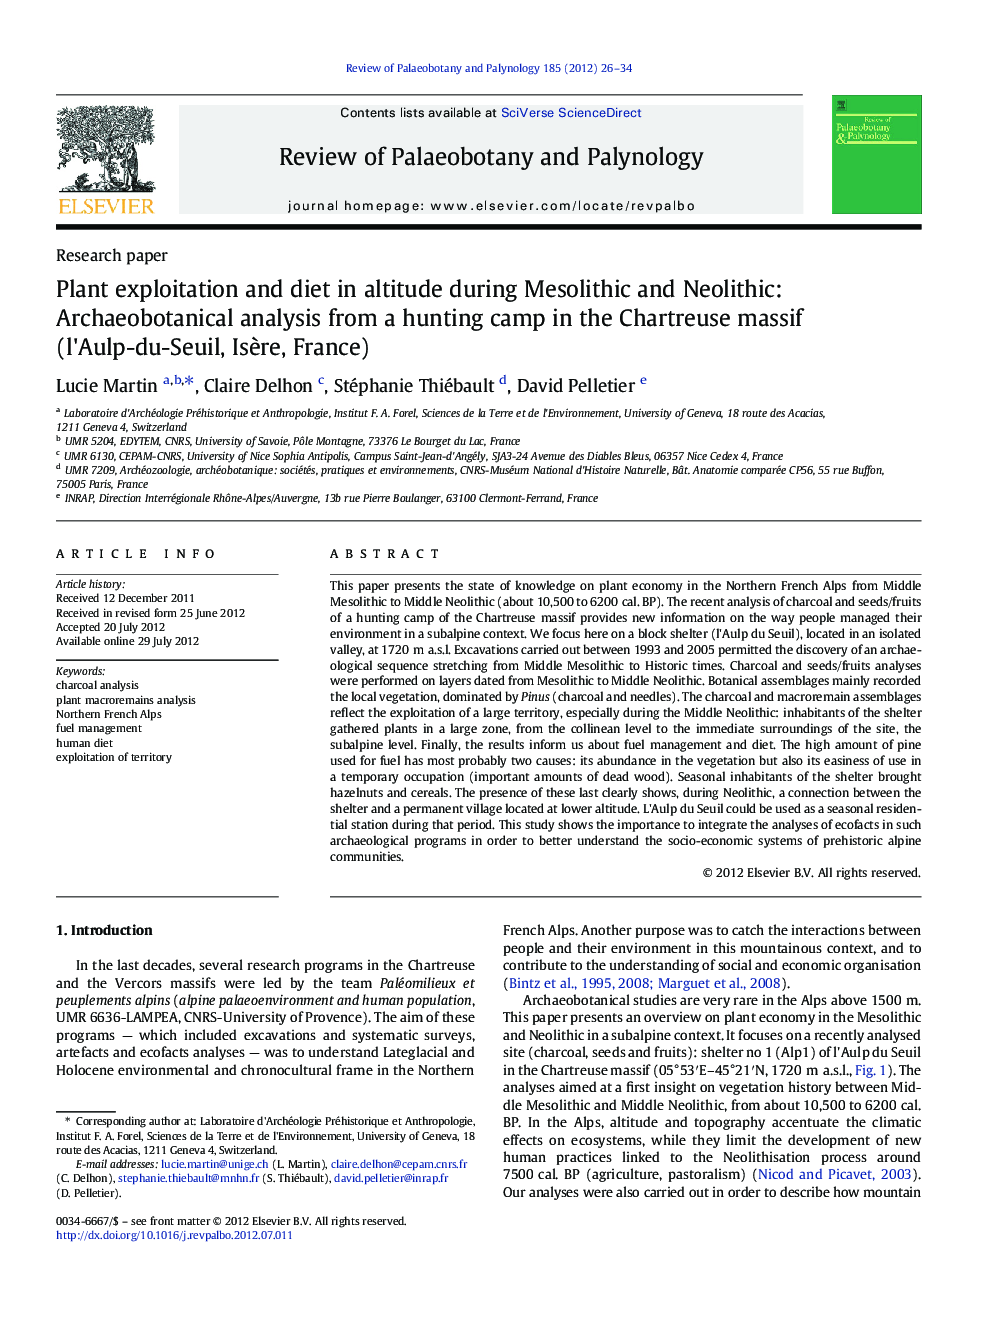 Plant exploitation and diet in altitude during Mesolithic and Neolithic: Archaeobotanical analysis from a hunting camp in the Chartreuse massif (l'Aulp-du-Seuil, Isère, France)